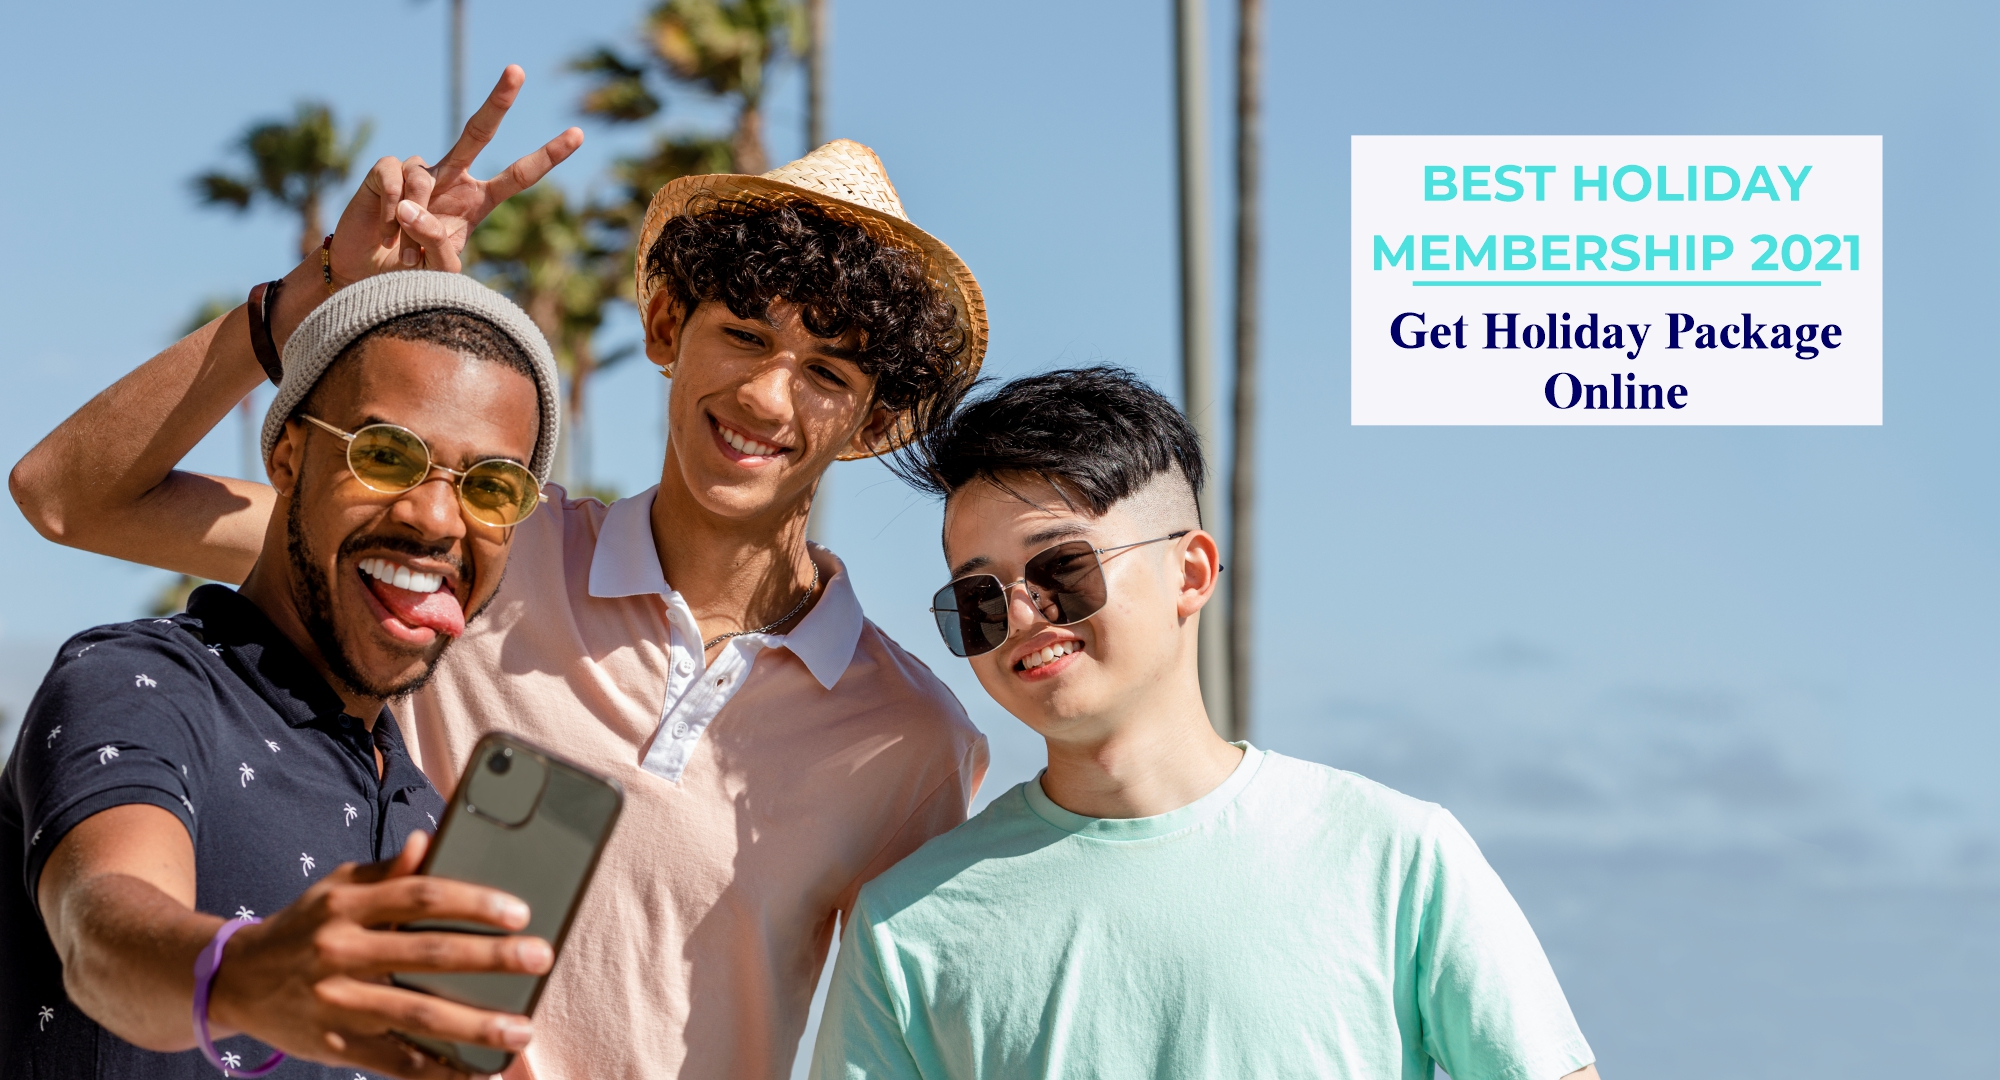 Best Holiday Membership 2021 | Get Holiday Package Online